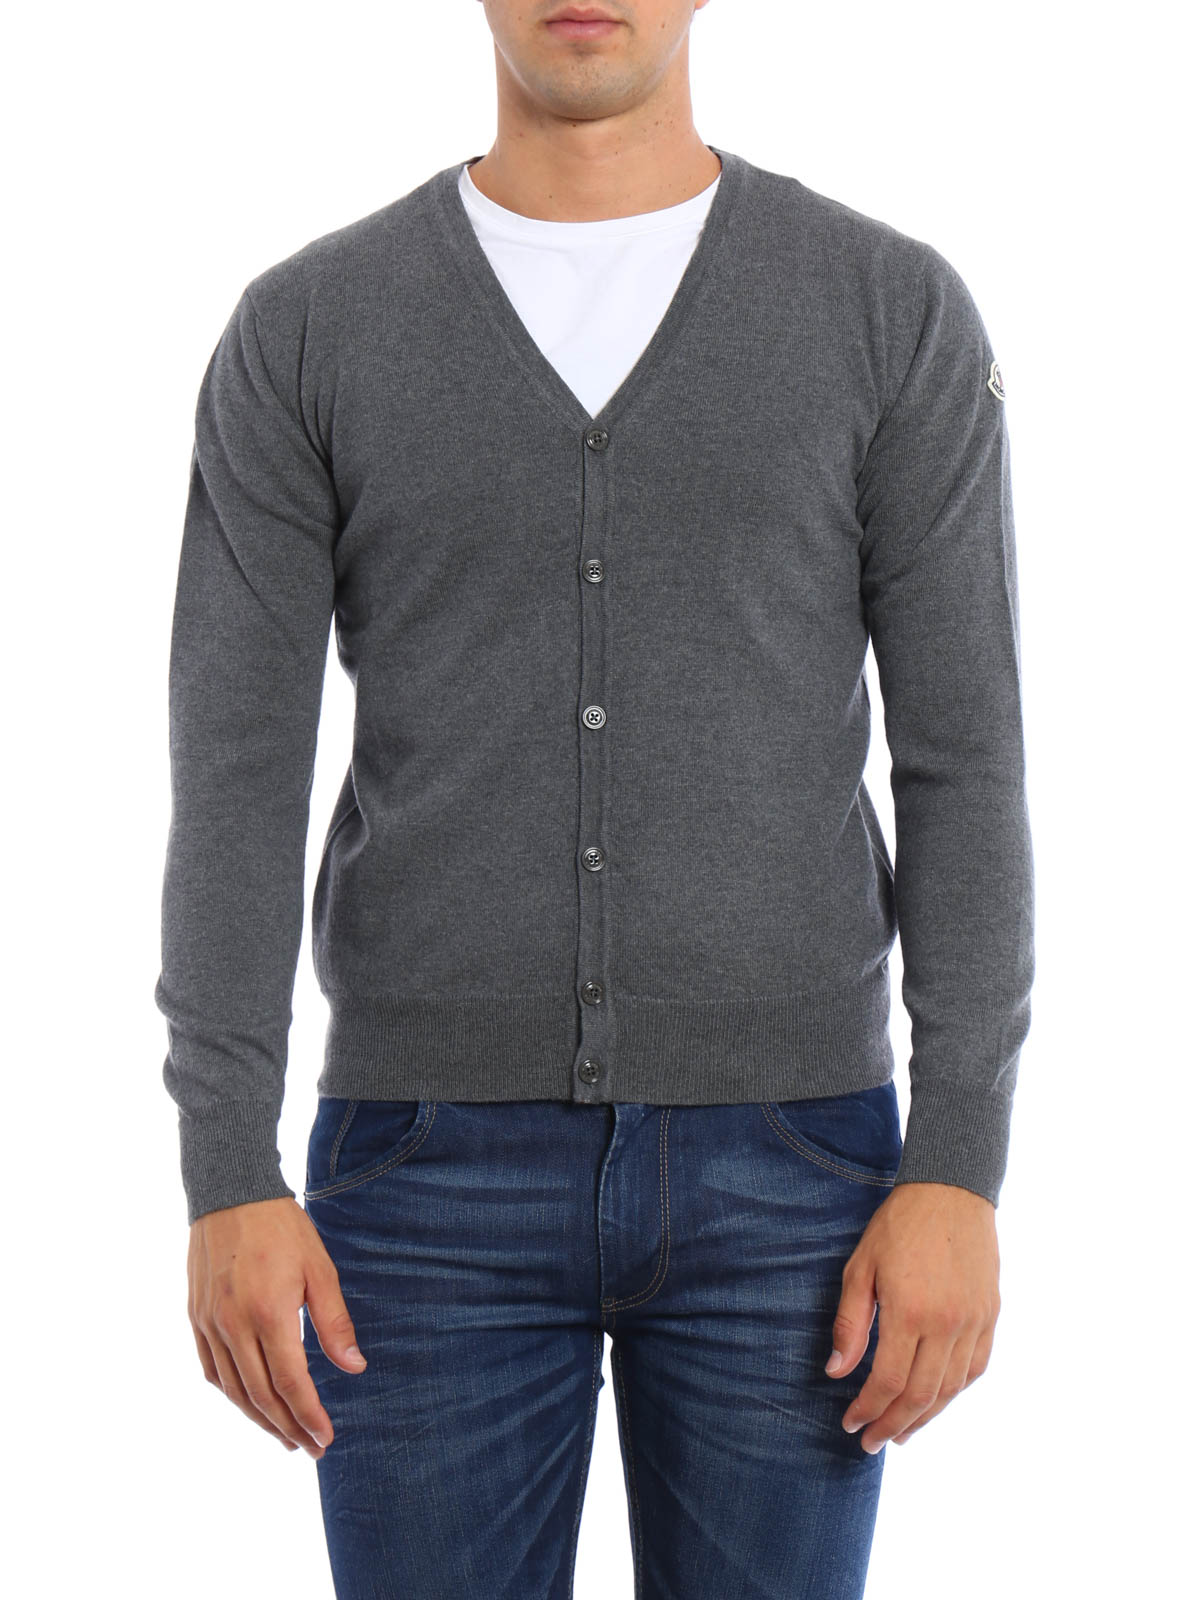 Wool cardigan by Moncler - cardigans | iKRIX